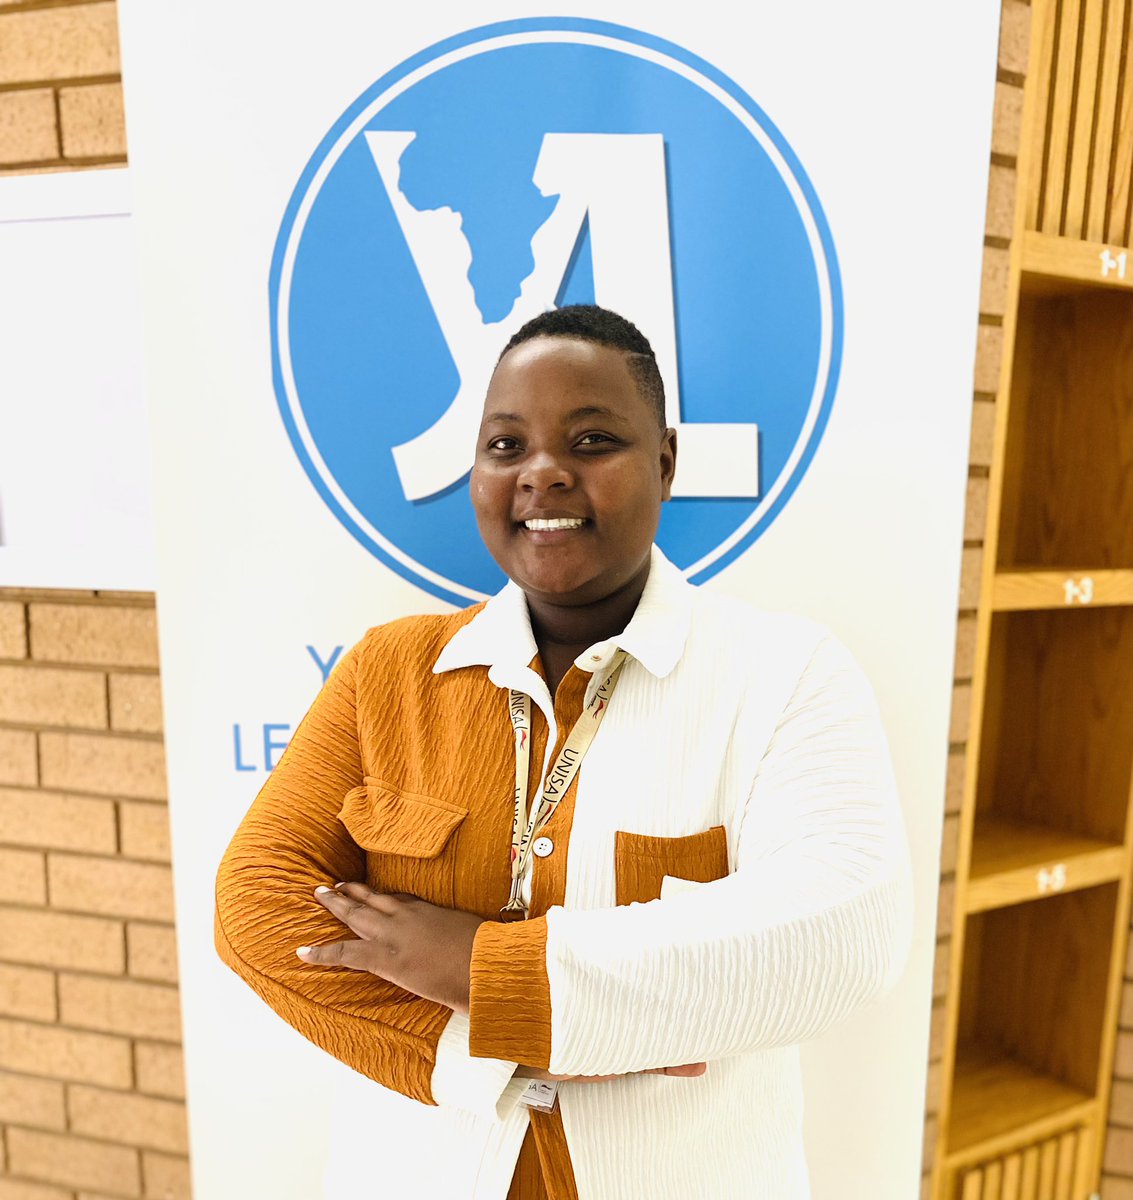 Hi all, it’s been a minute. I am happy to announce that I have been selected as one of the participants for the @YALI Regional Leadership Center Southern Africa Cohort 23. Out of more than 6000 applicants across SADC, I was selected amongst young leaders in the region.